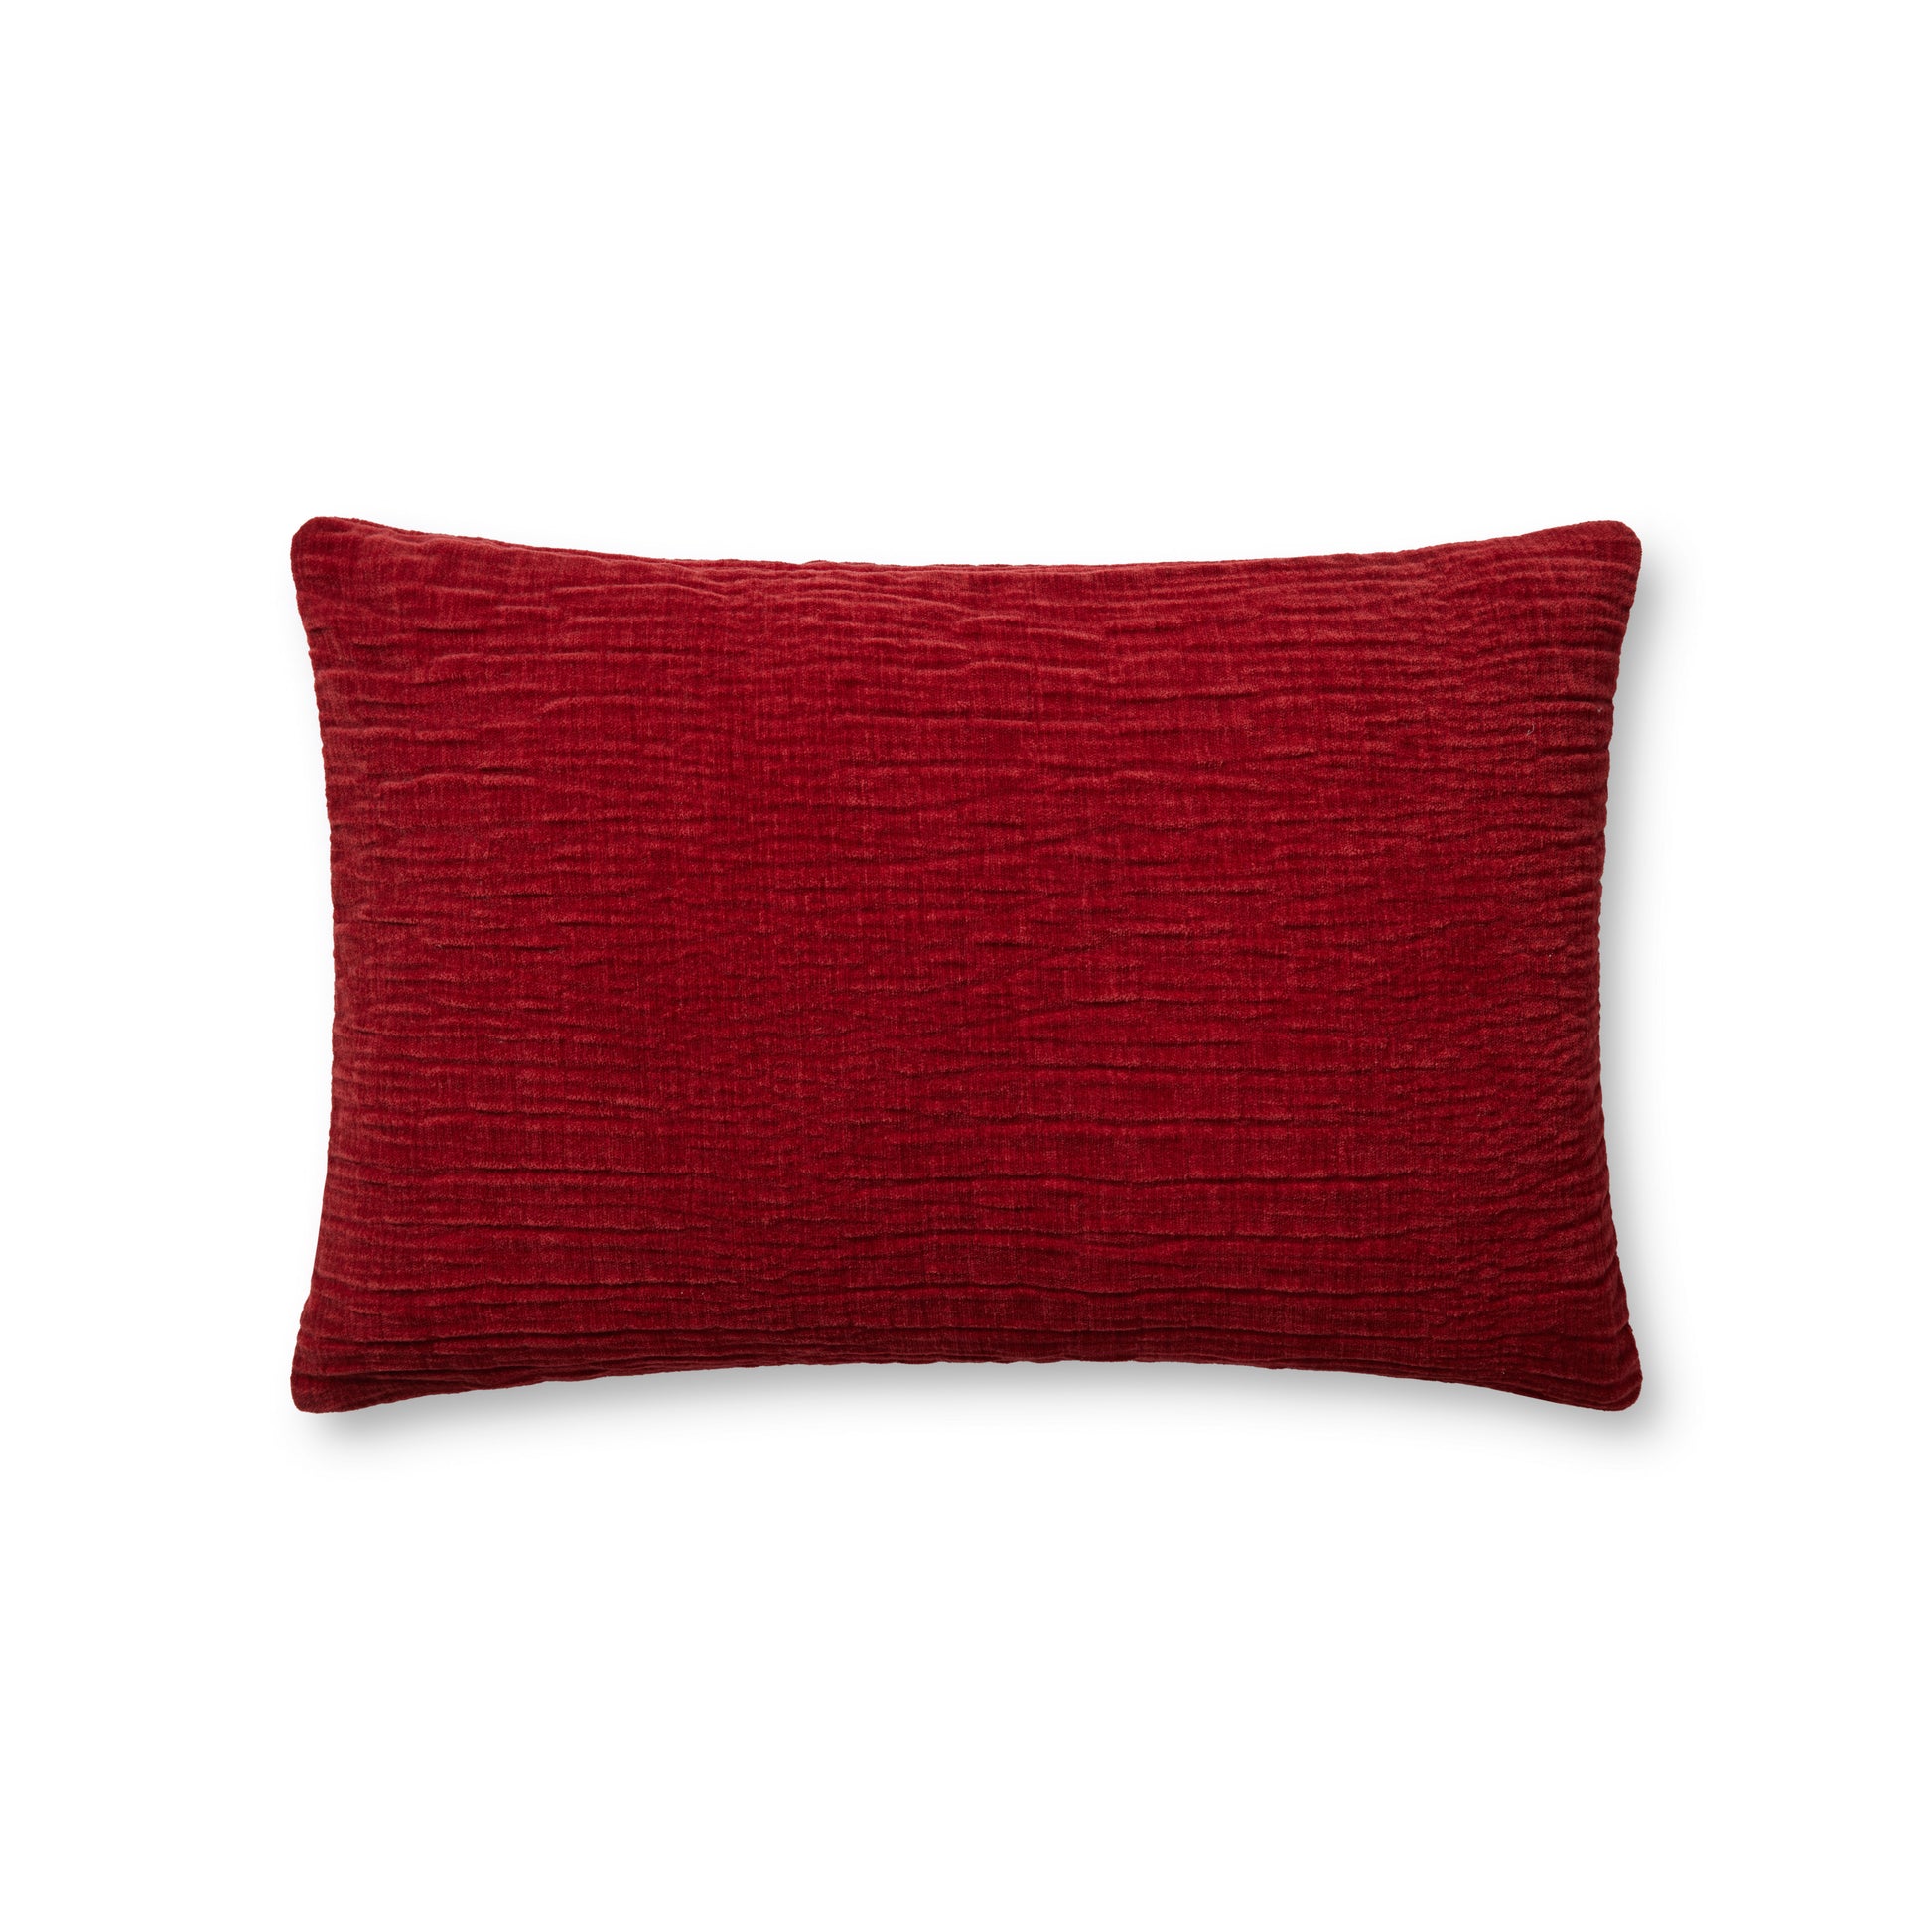 Photo of a pillow;  Red 13'' x 21'' Cover w/Poly Pillow